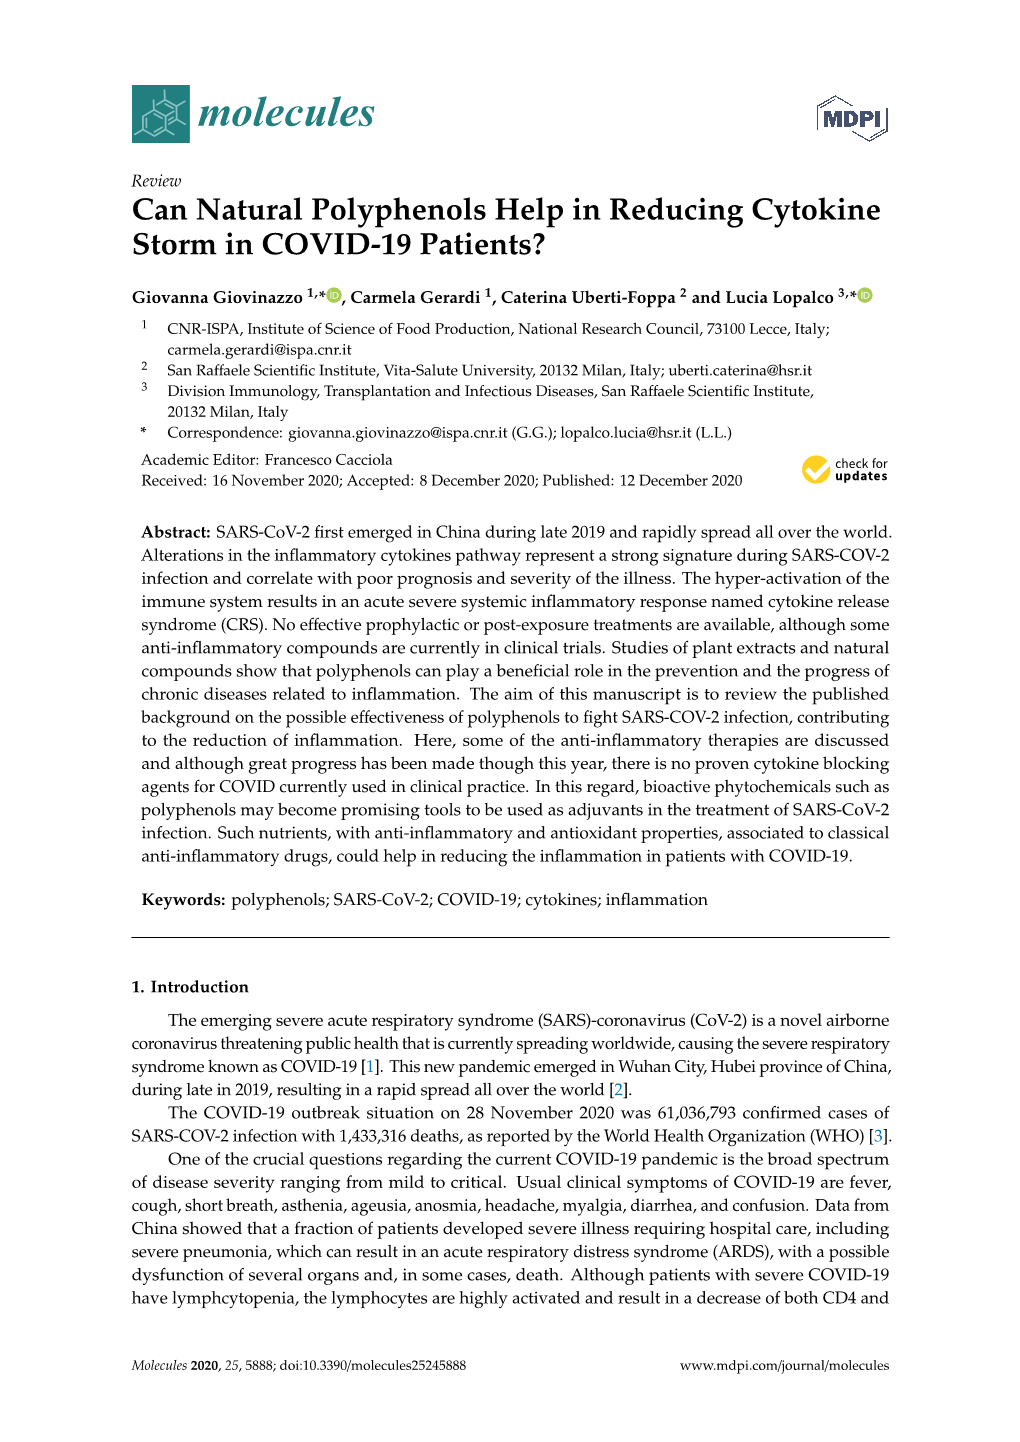 Can Natural Polyphenols Help in Reducing Cytokine Storm in COVID-19 Patients?